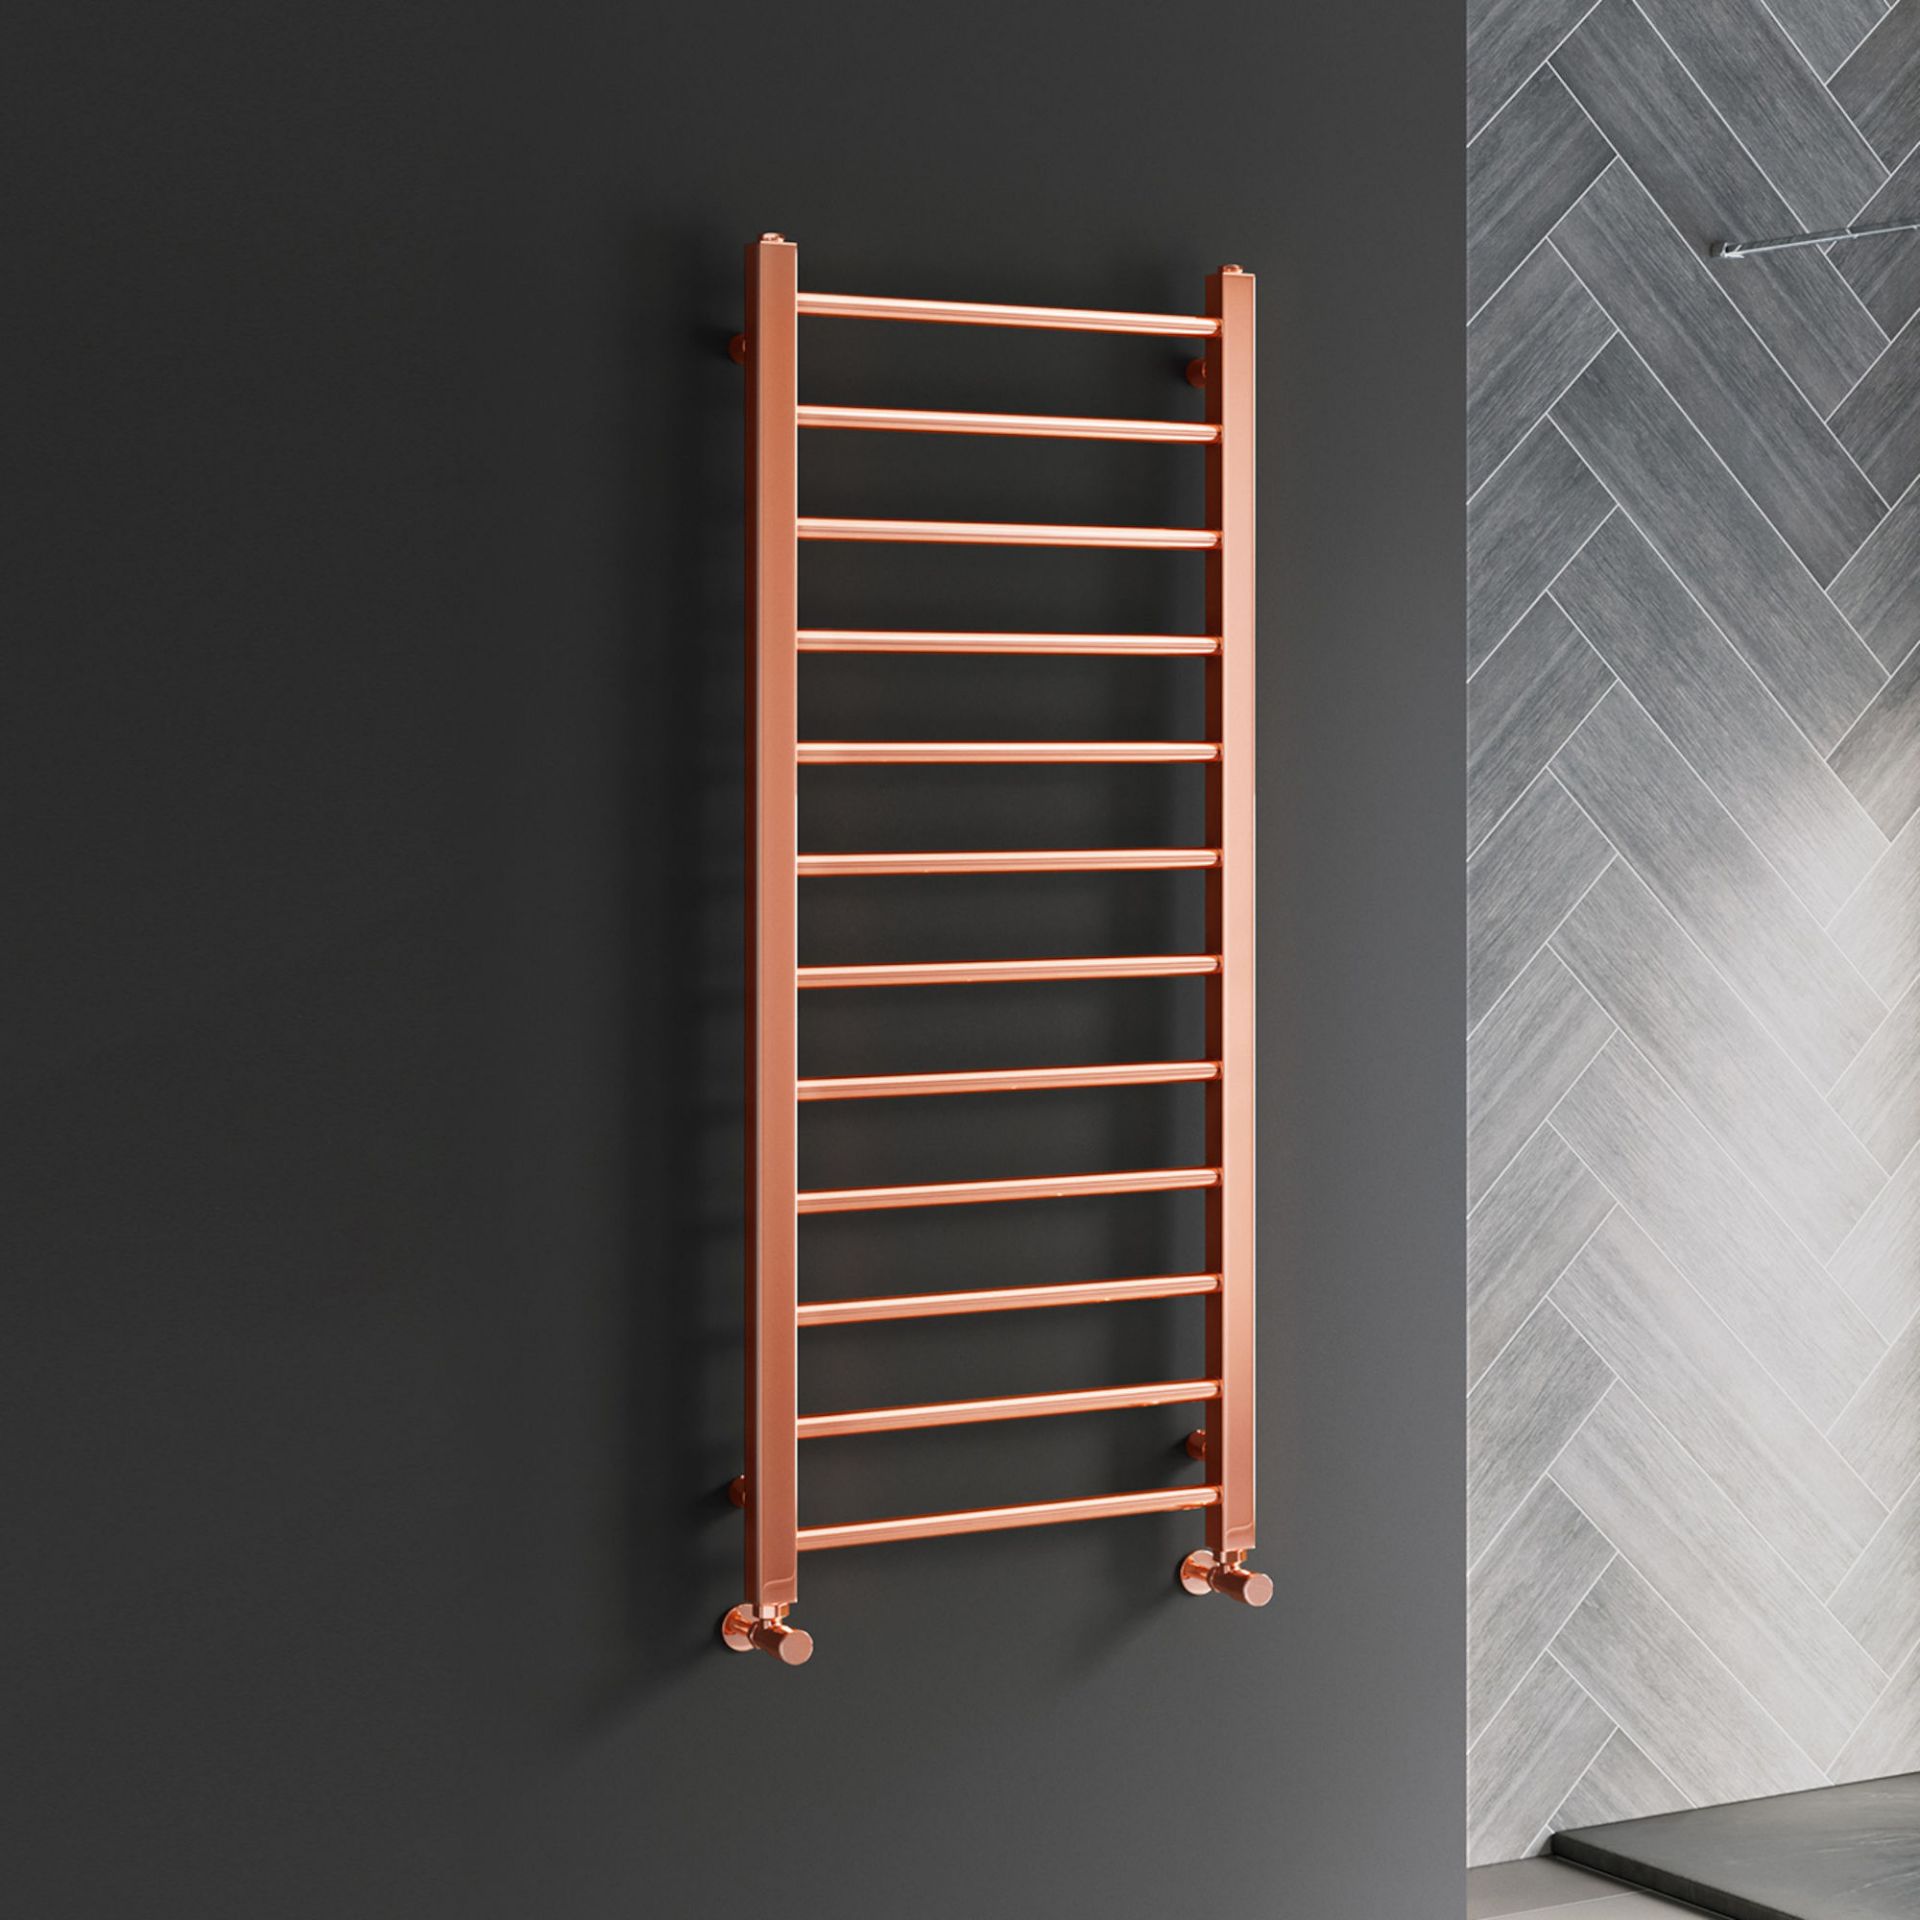 (J26) 1200x500mm Copper Heated Straight Rail Ladder Towel Radiator. RRP £379.99. Constructed...